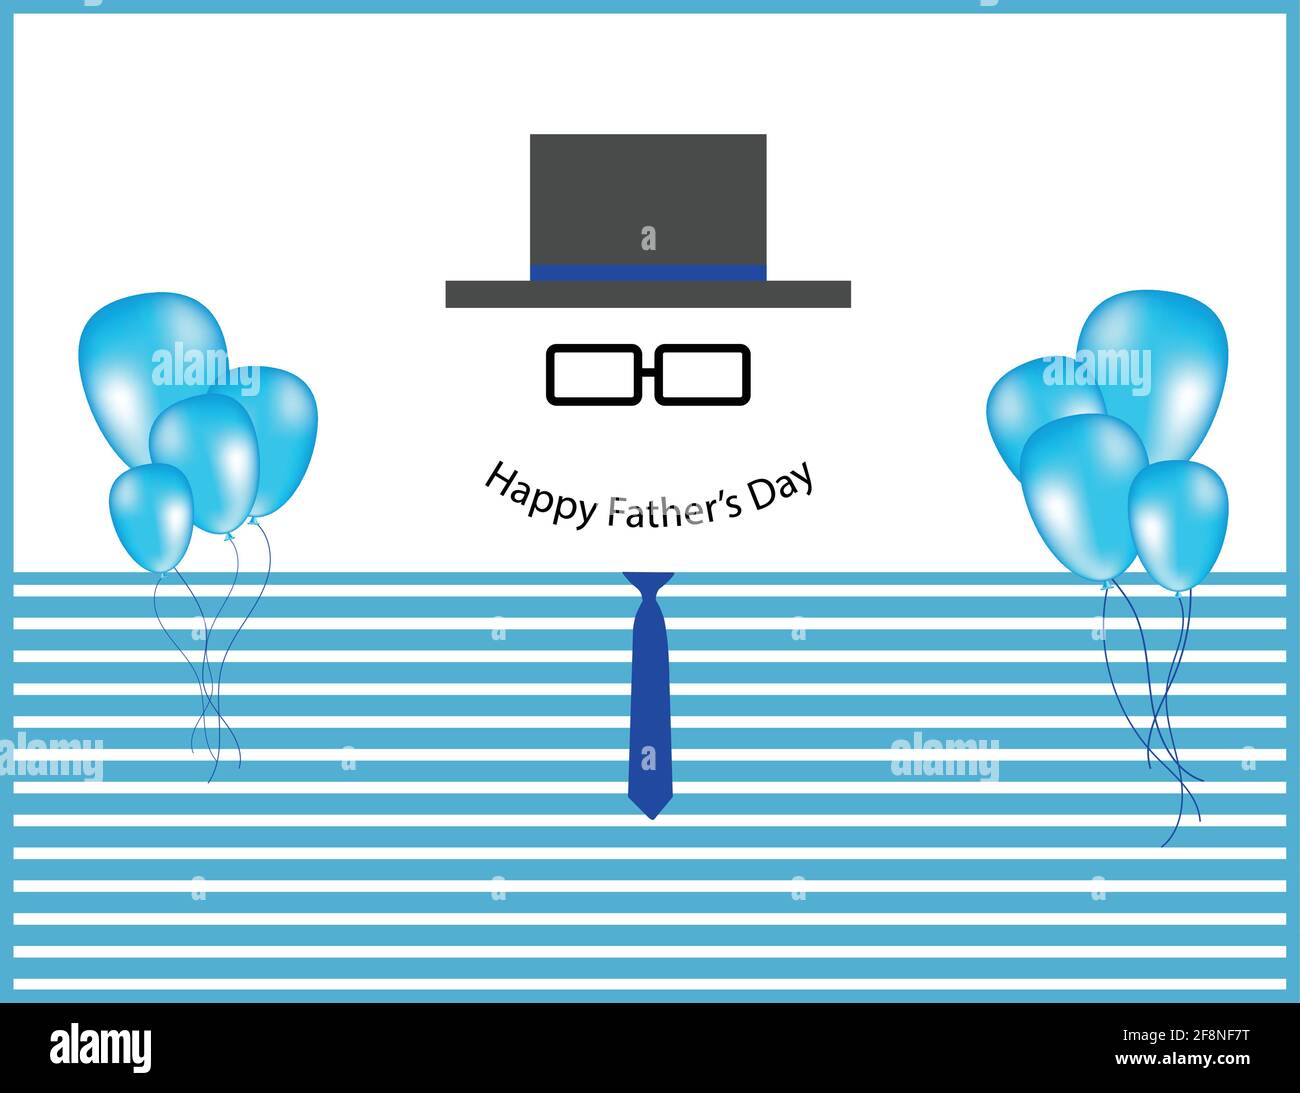 Happy Father’s Day design with gentleman silhouette and Balloons Light Blue over stripes pattern. Stock Vector